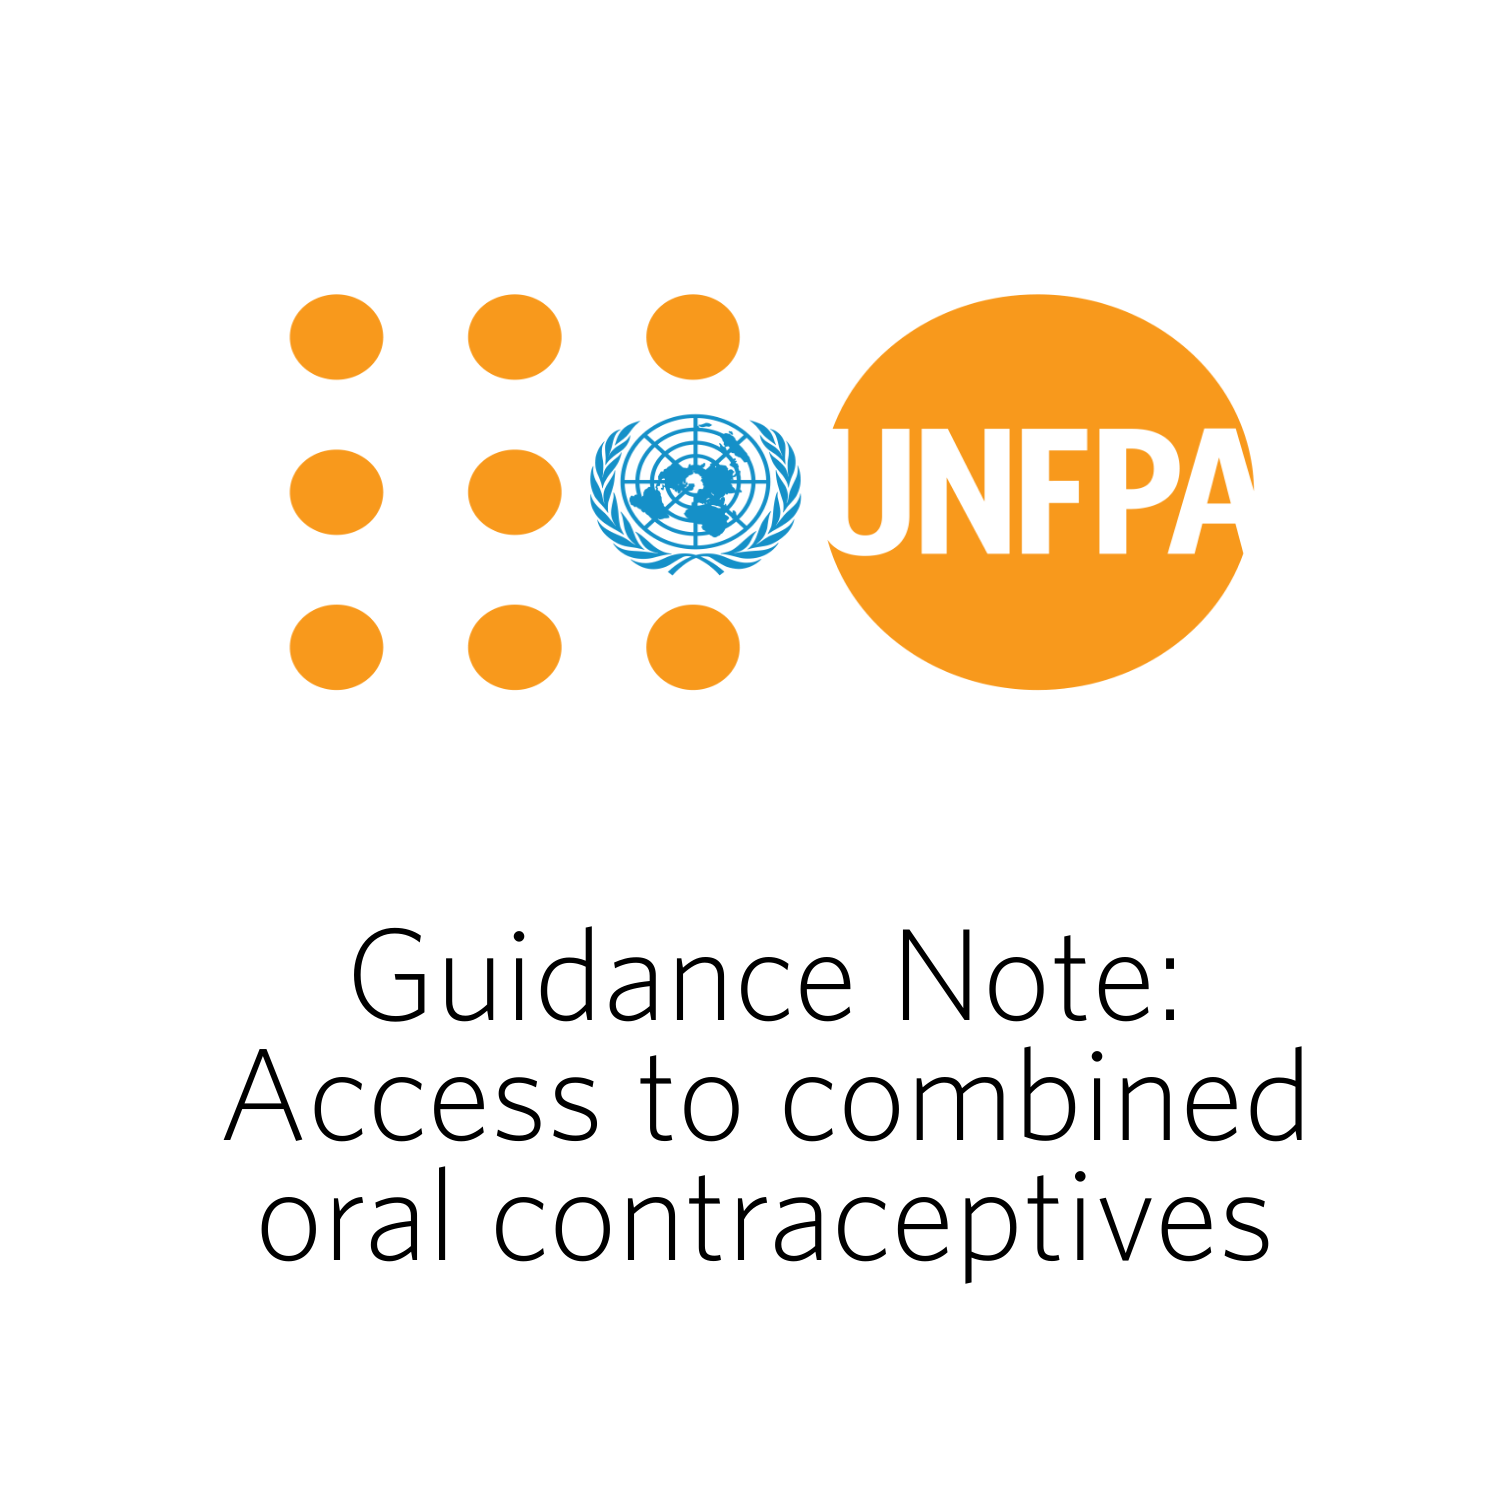 Safeguarding access to combined oral contraceptives